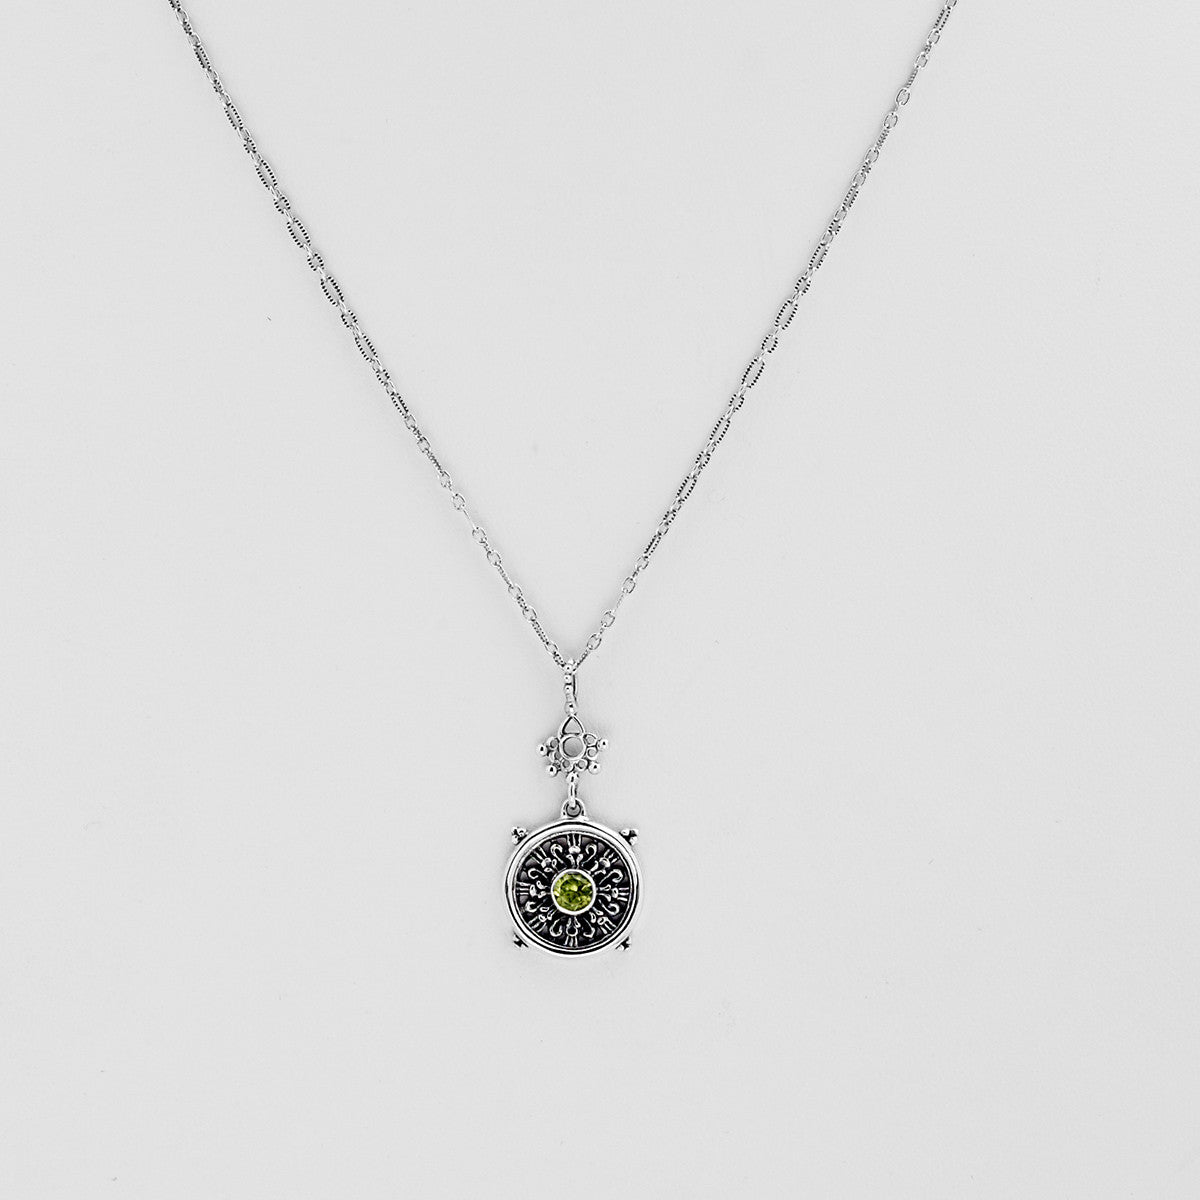 Dharmachakra Sterling Silver Peridot Grace Necklace - Cynthia Gale New York Jewelry